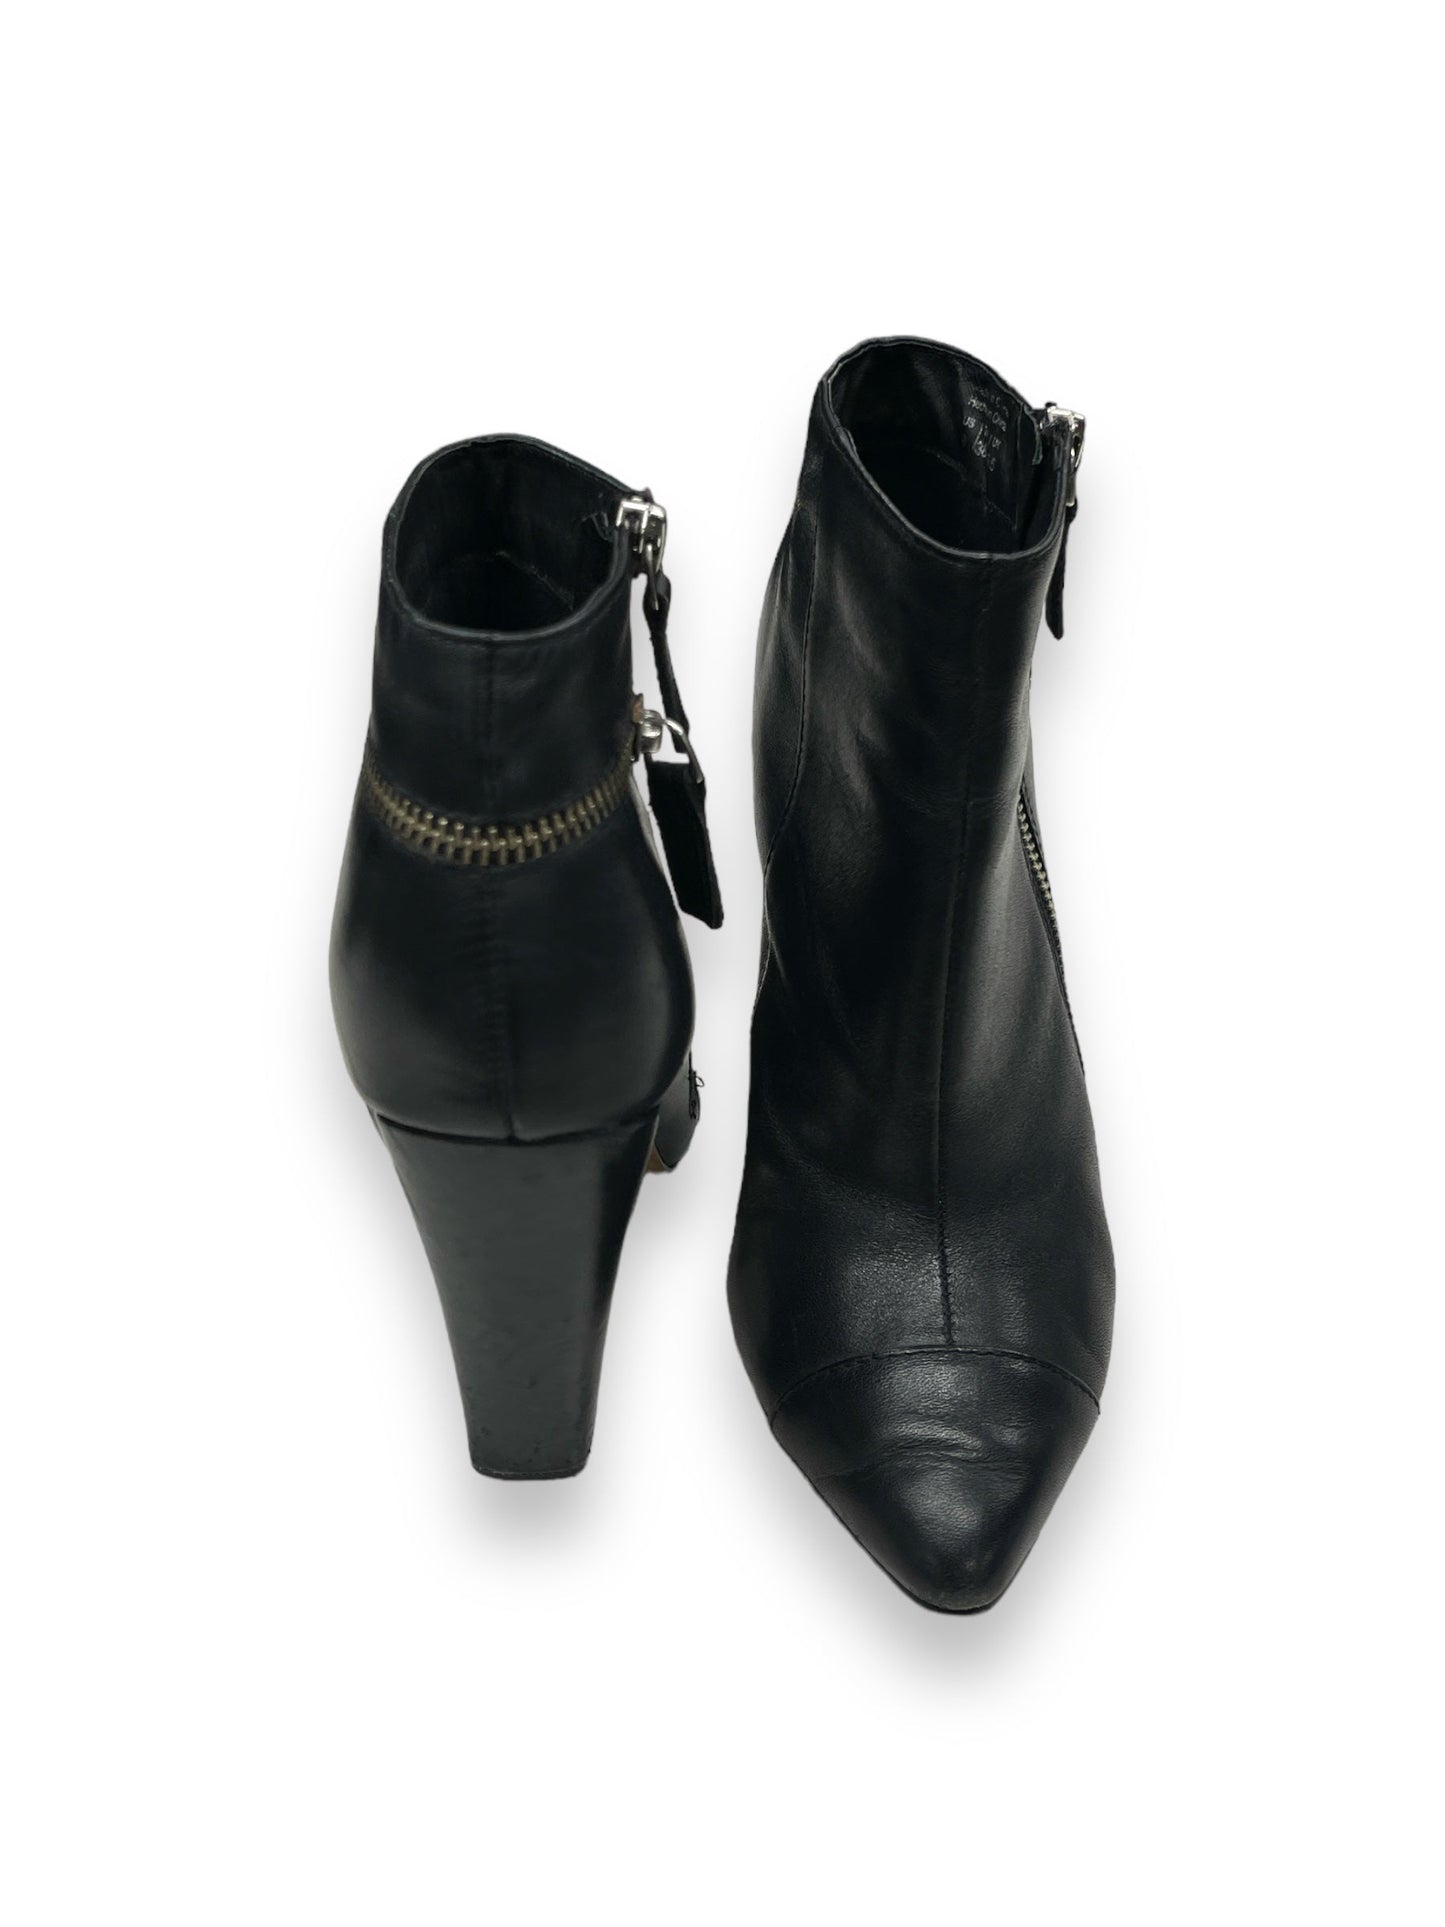 Boots Ankle Heels By Aldo  Size: 8